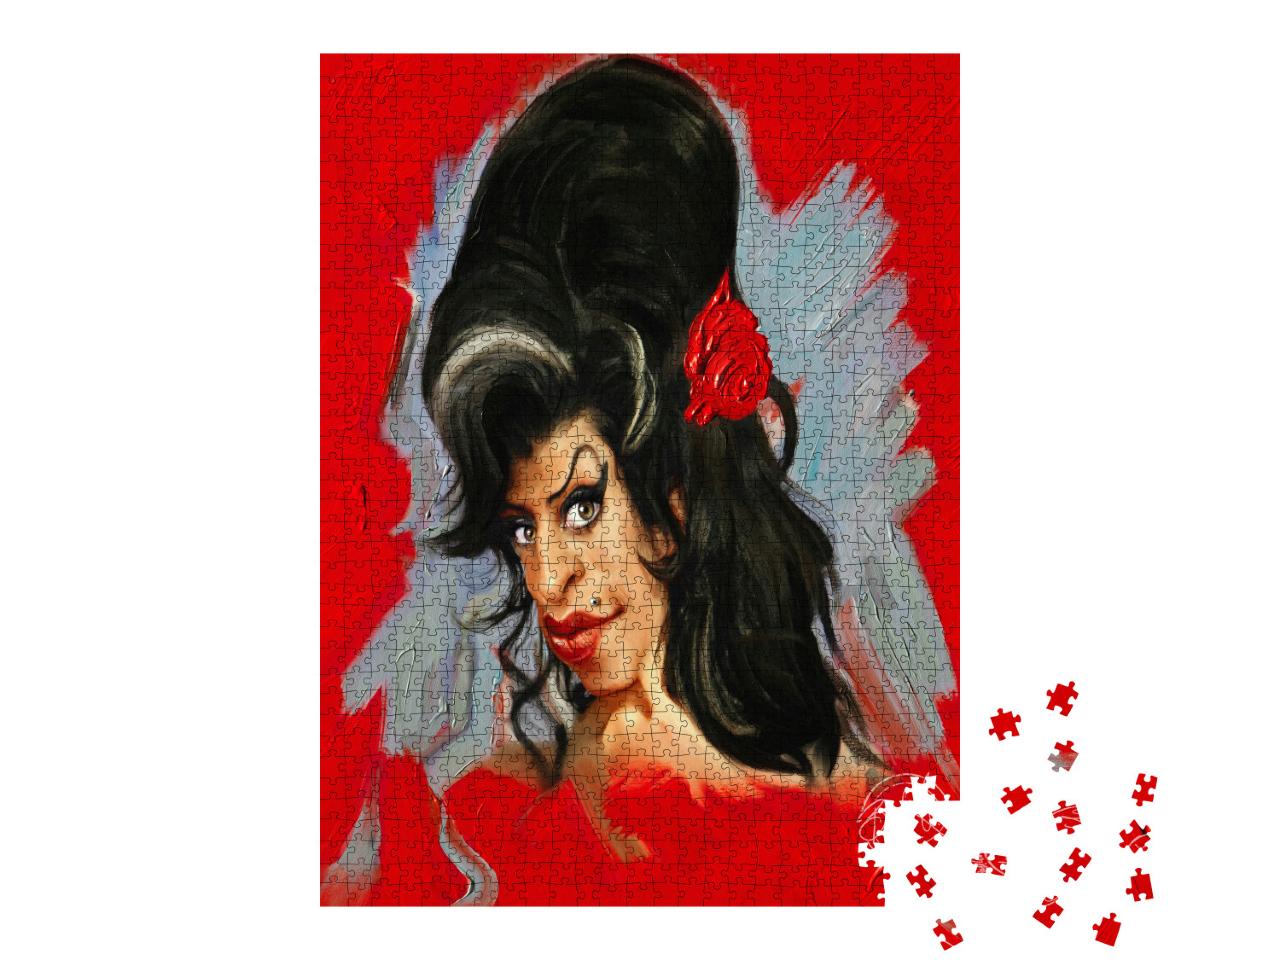 Beehive Hair Singer Portrait Jigsaw Puzzle with 1000 pieces